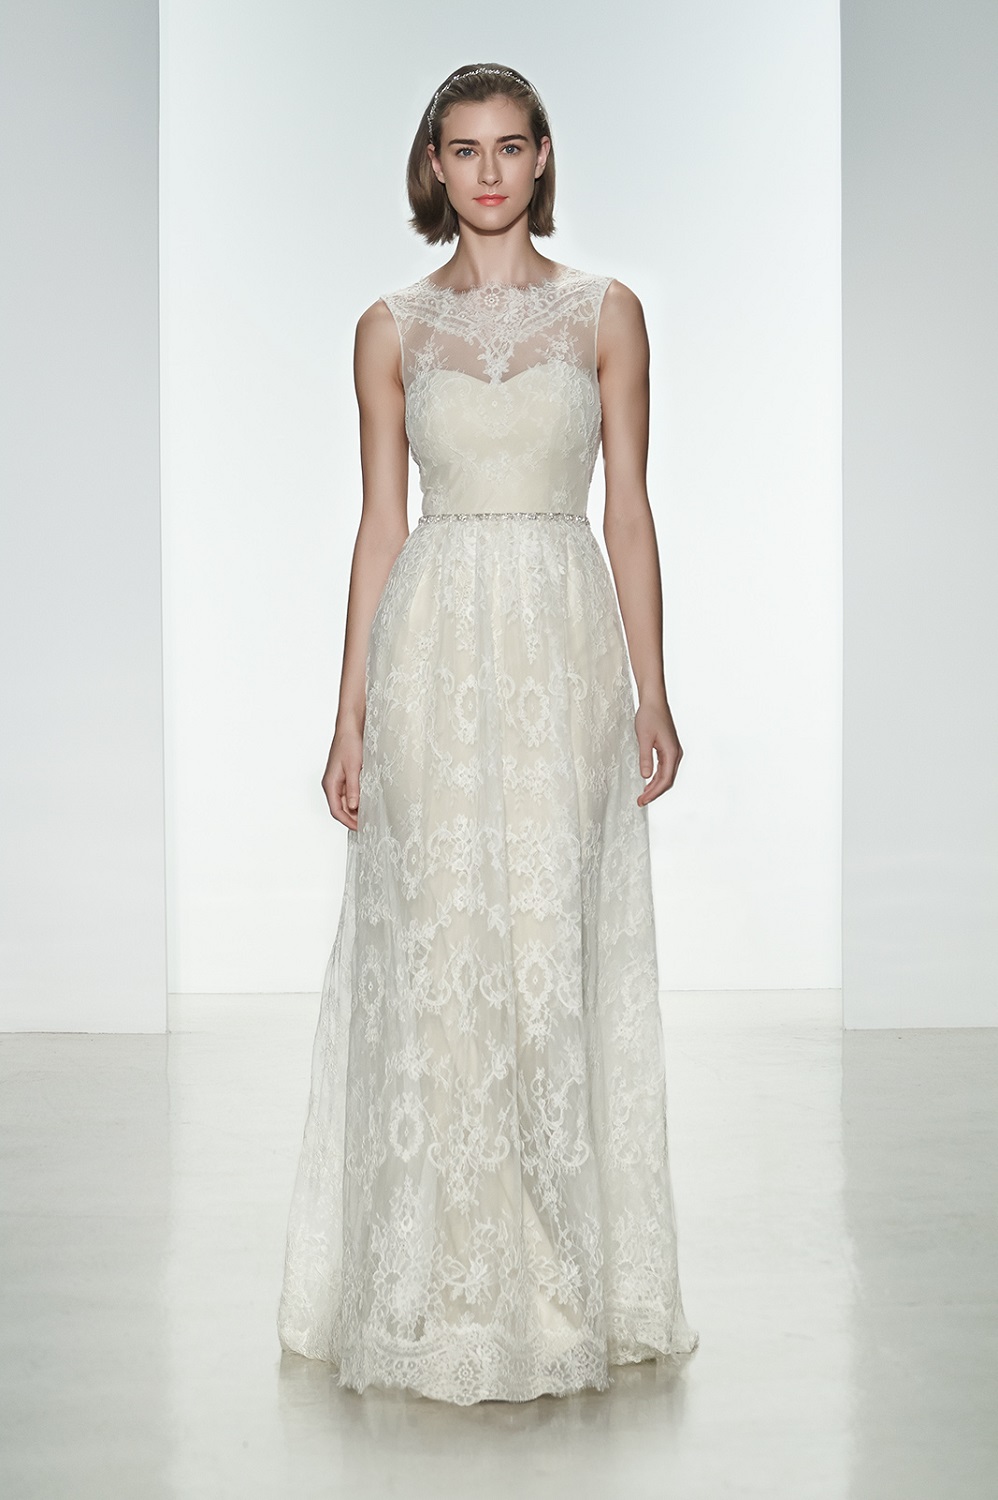 Wedding Dress with a Dramatic Neckline from Christos Spring 2015 Bridal Collection